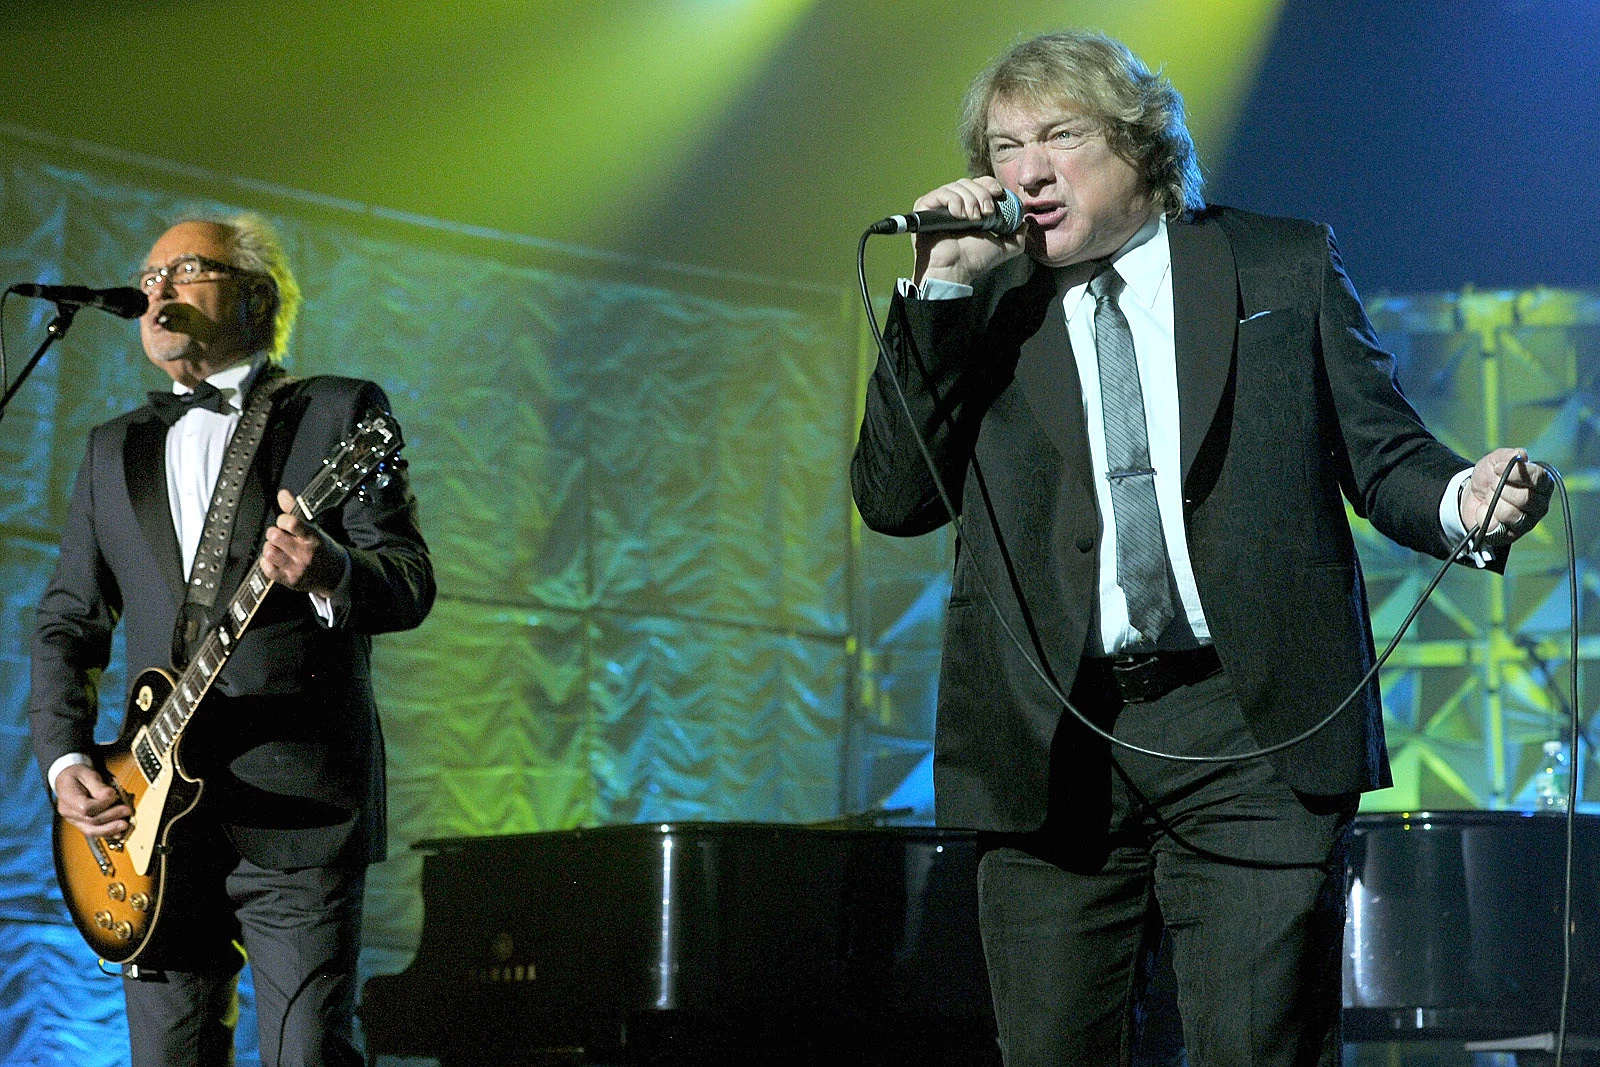 The Foreigner Song Lou Gramm Doesn’t Want Played at the Rock Hall